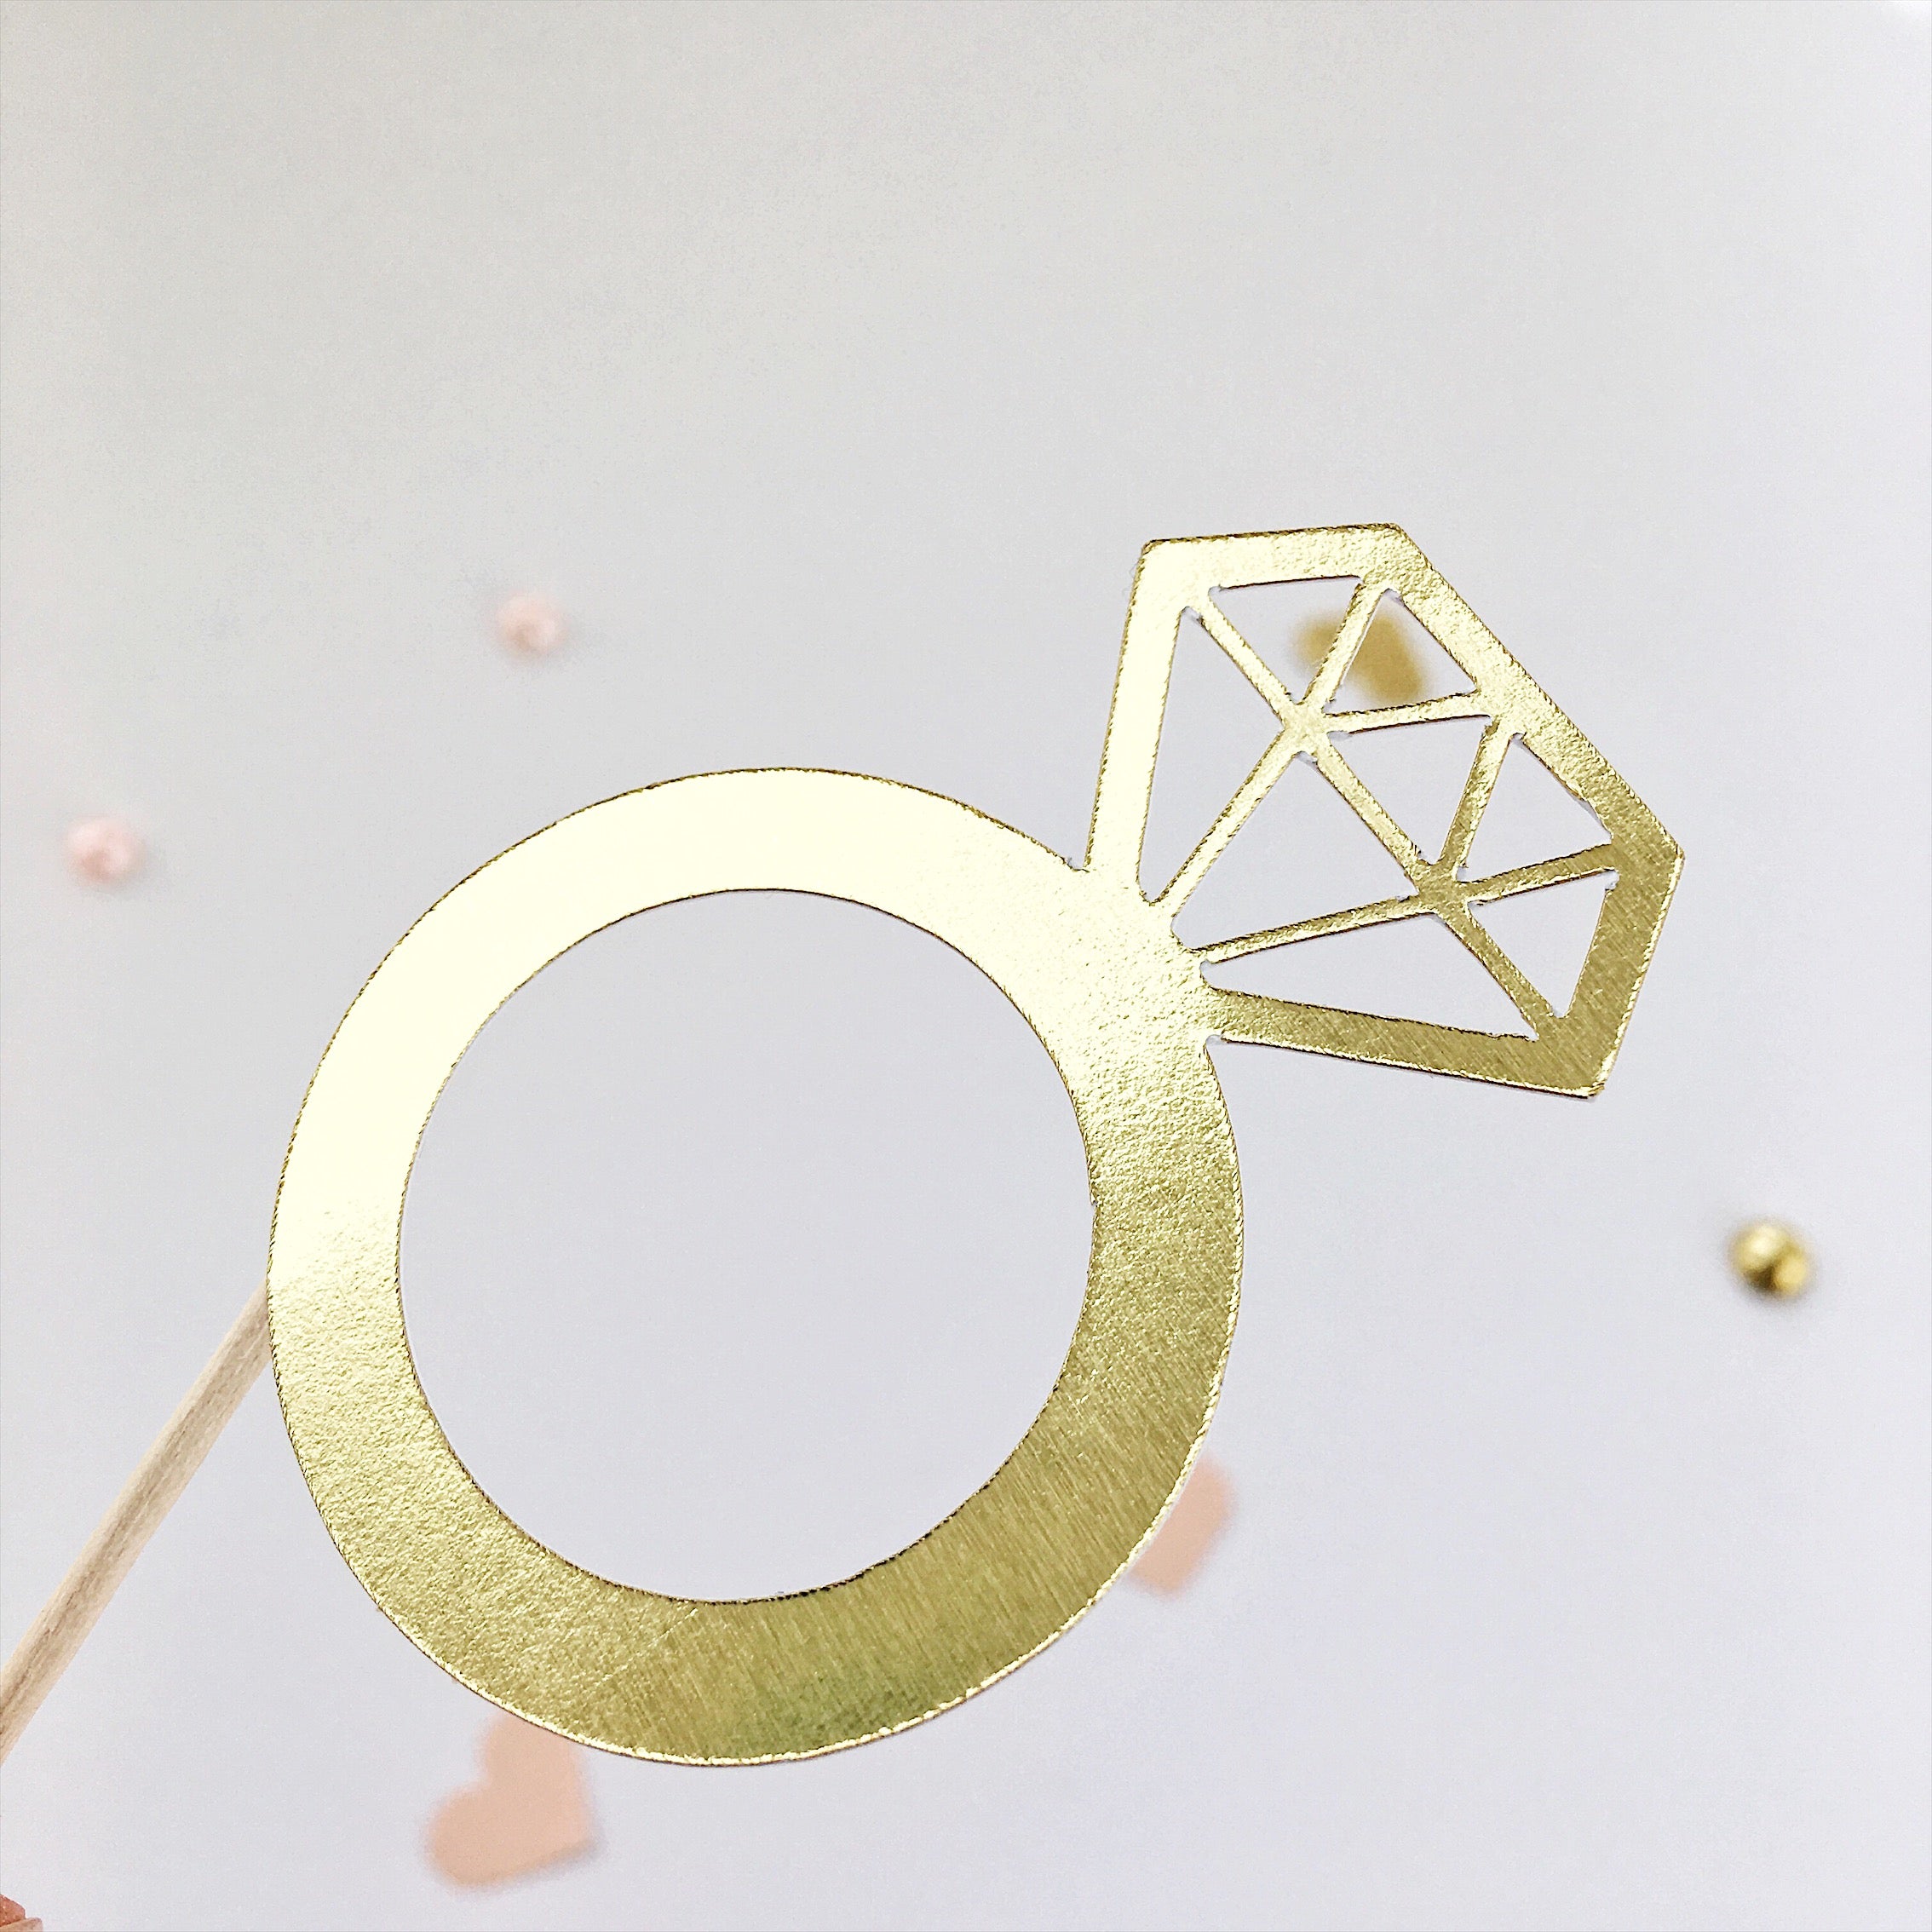 Rings Cupcake Toppers Engagement Party Decor Engagement Party Ideas Bridal Shower Decor Blush Gold Wedding Decor Golden Decor